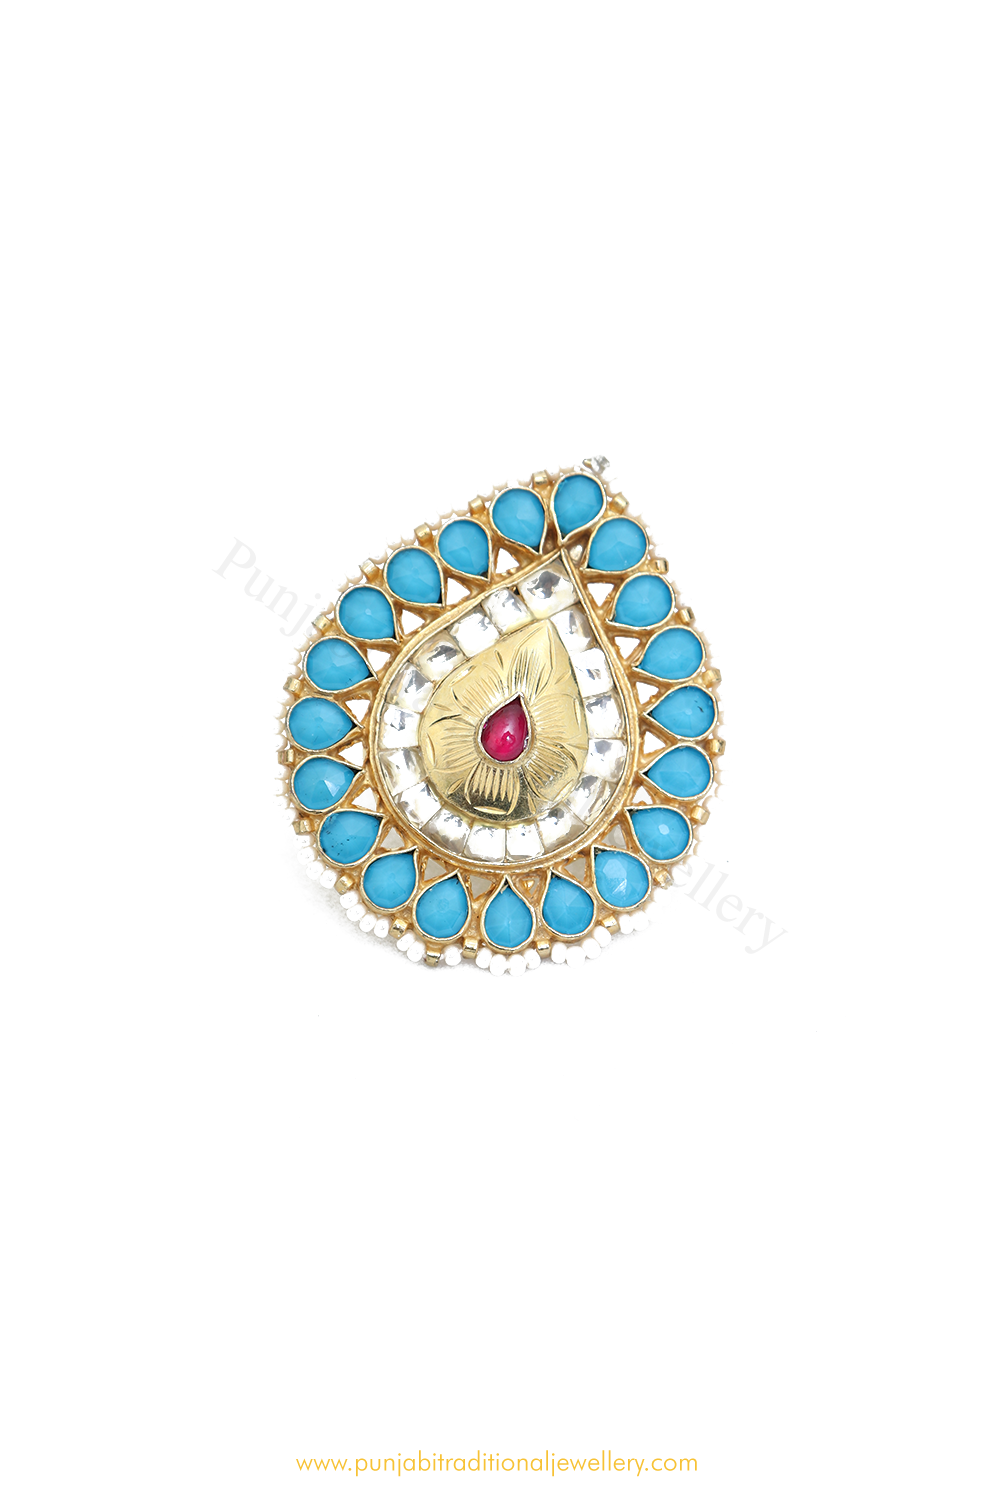 Dramatic Flair Finger Ring with Kundan Work